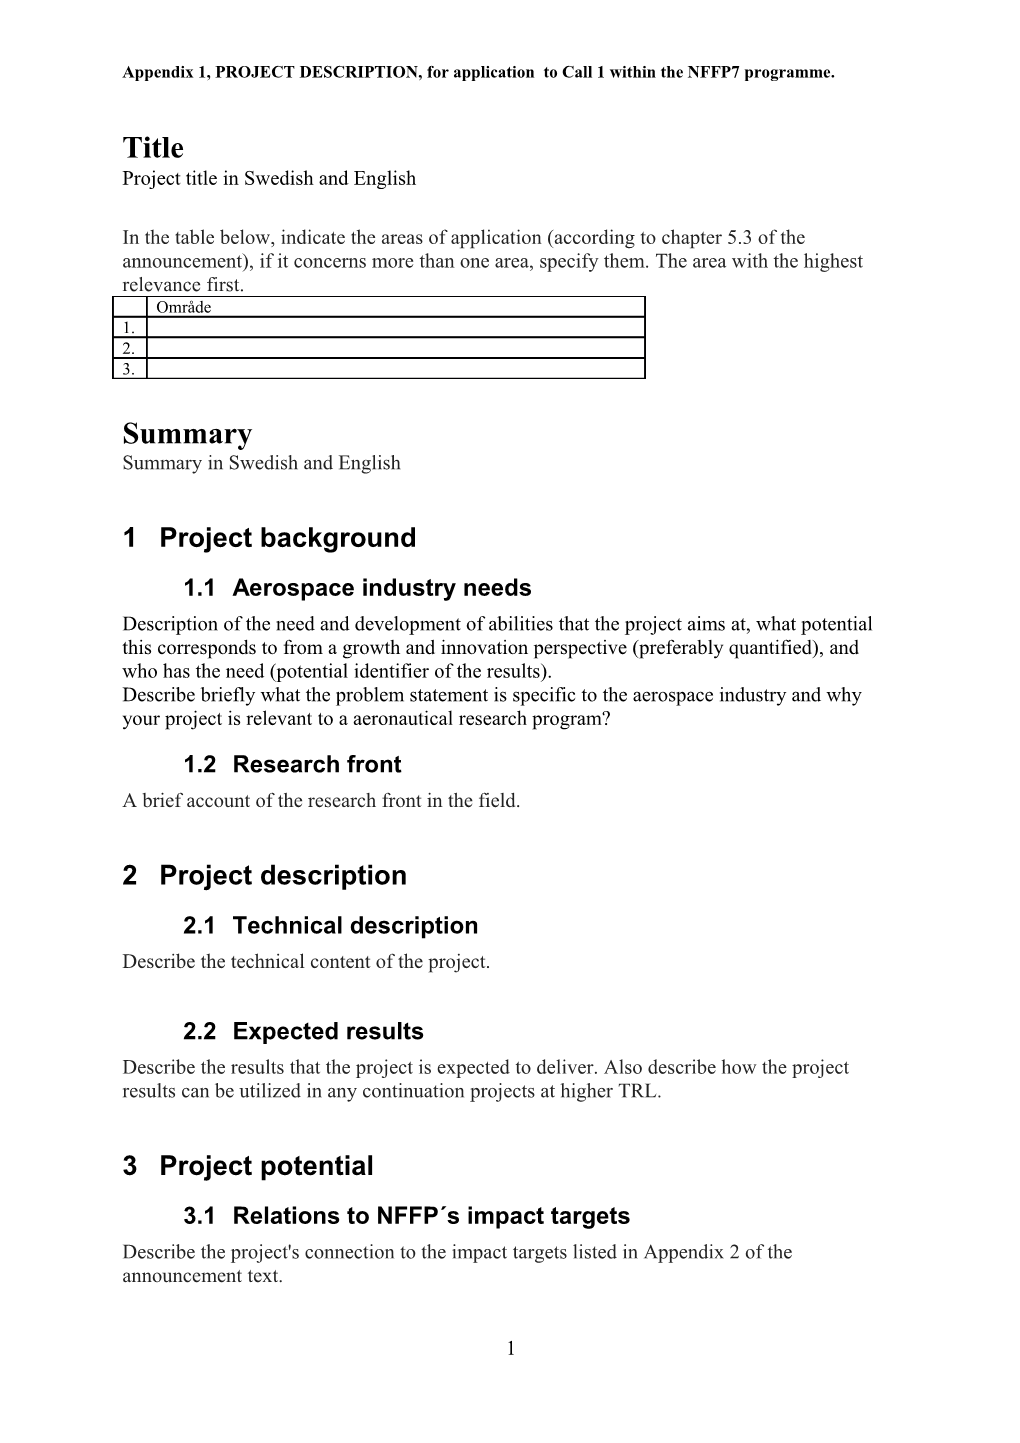 Appendix 1, PROJECT DESCRIPTION, for Application to Call 1 Within the Nffp7programme